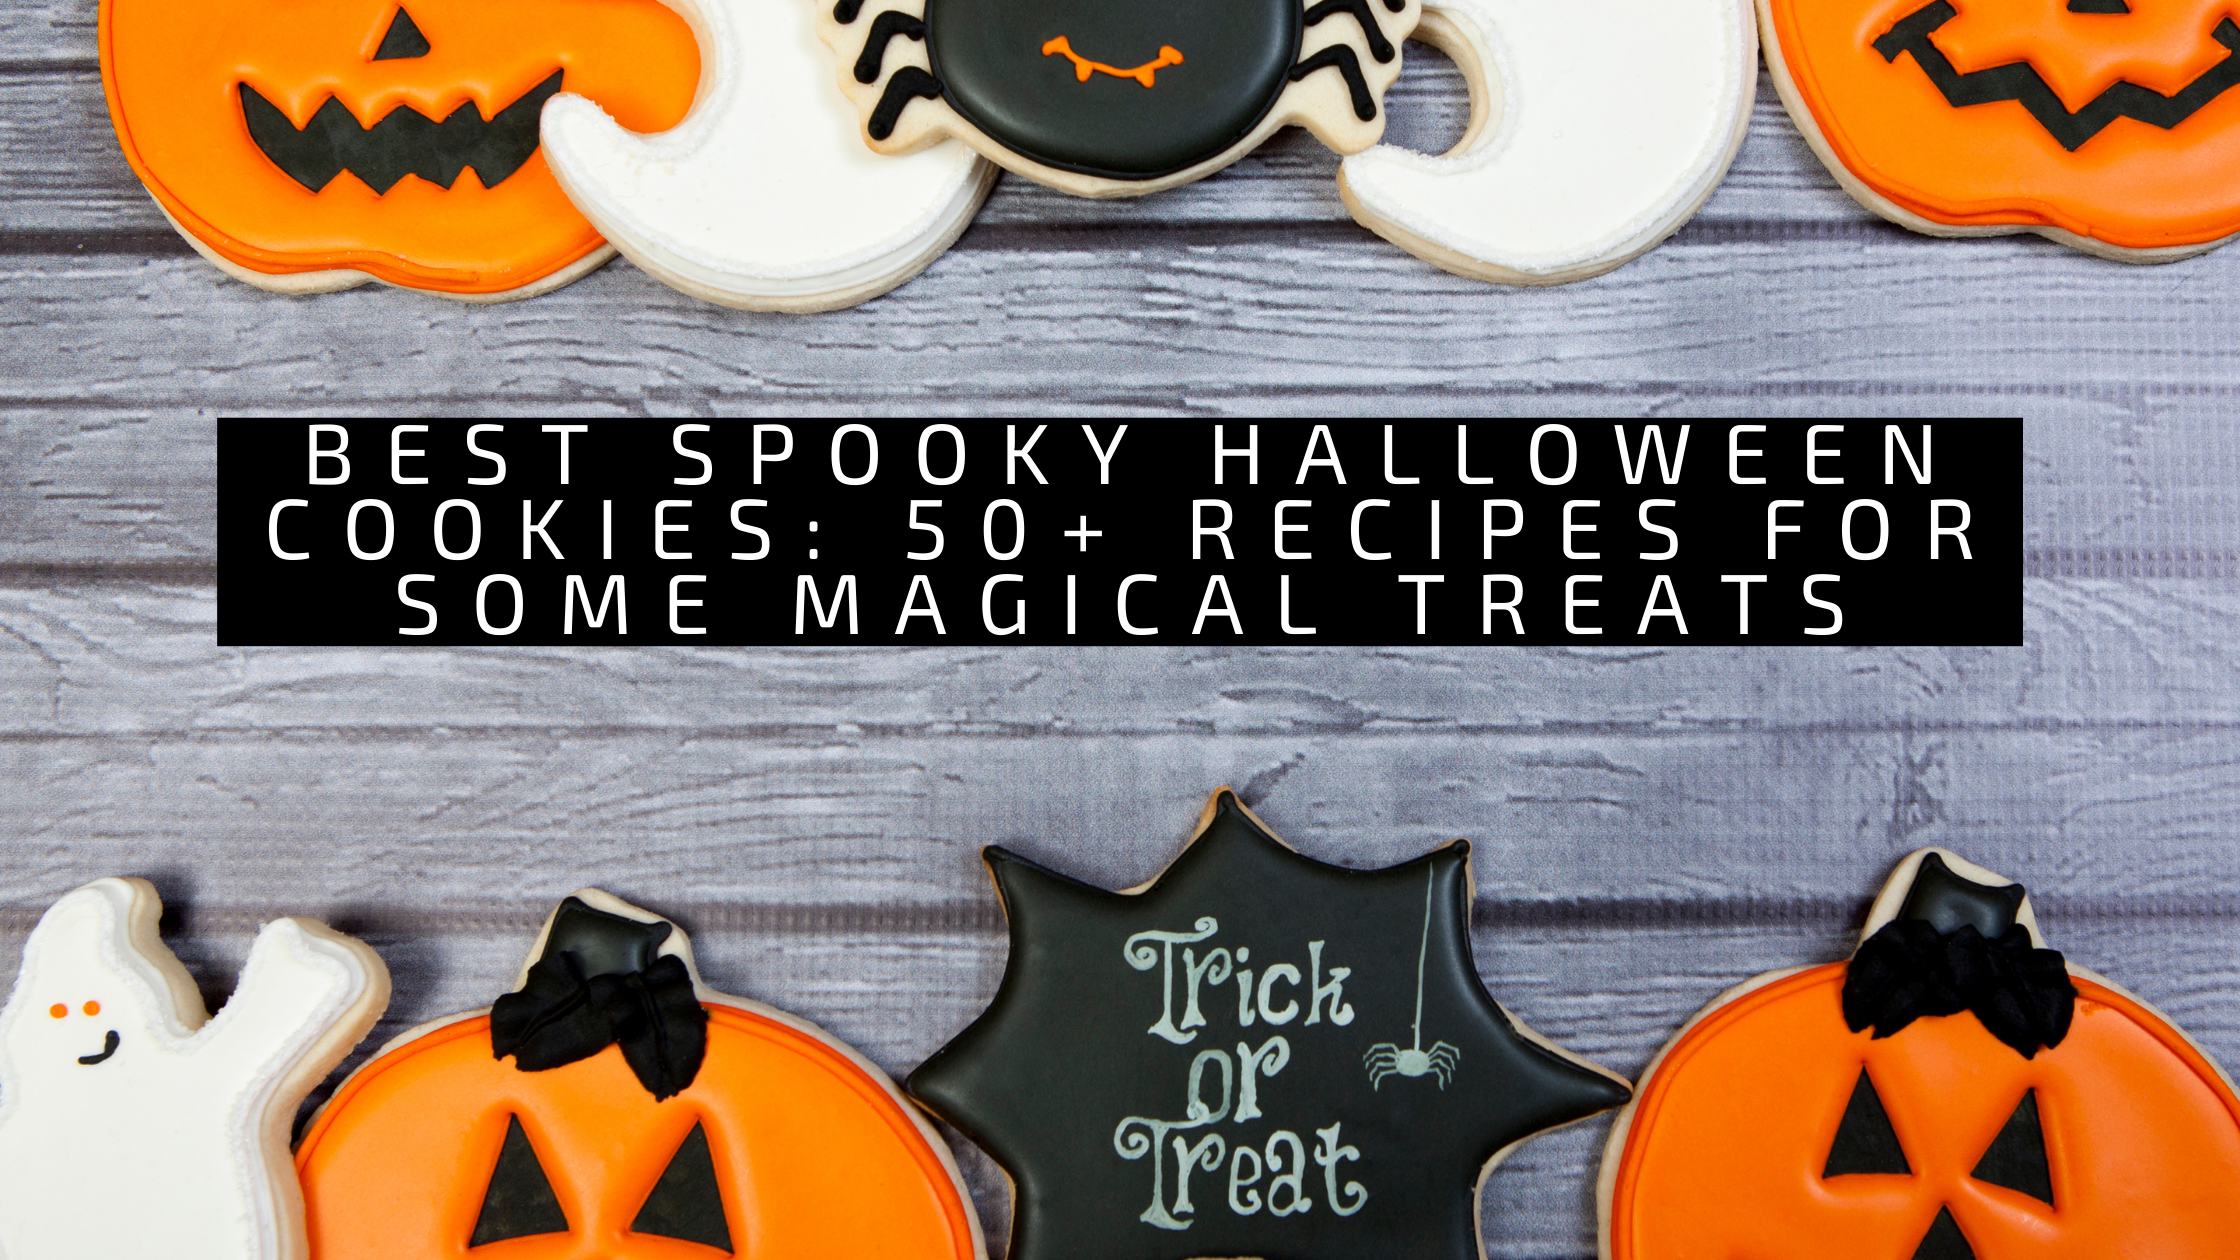 Best Spooky Halloween Cookies: 50+ Recipes for Some Magical Treats 135